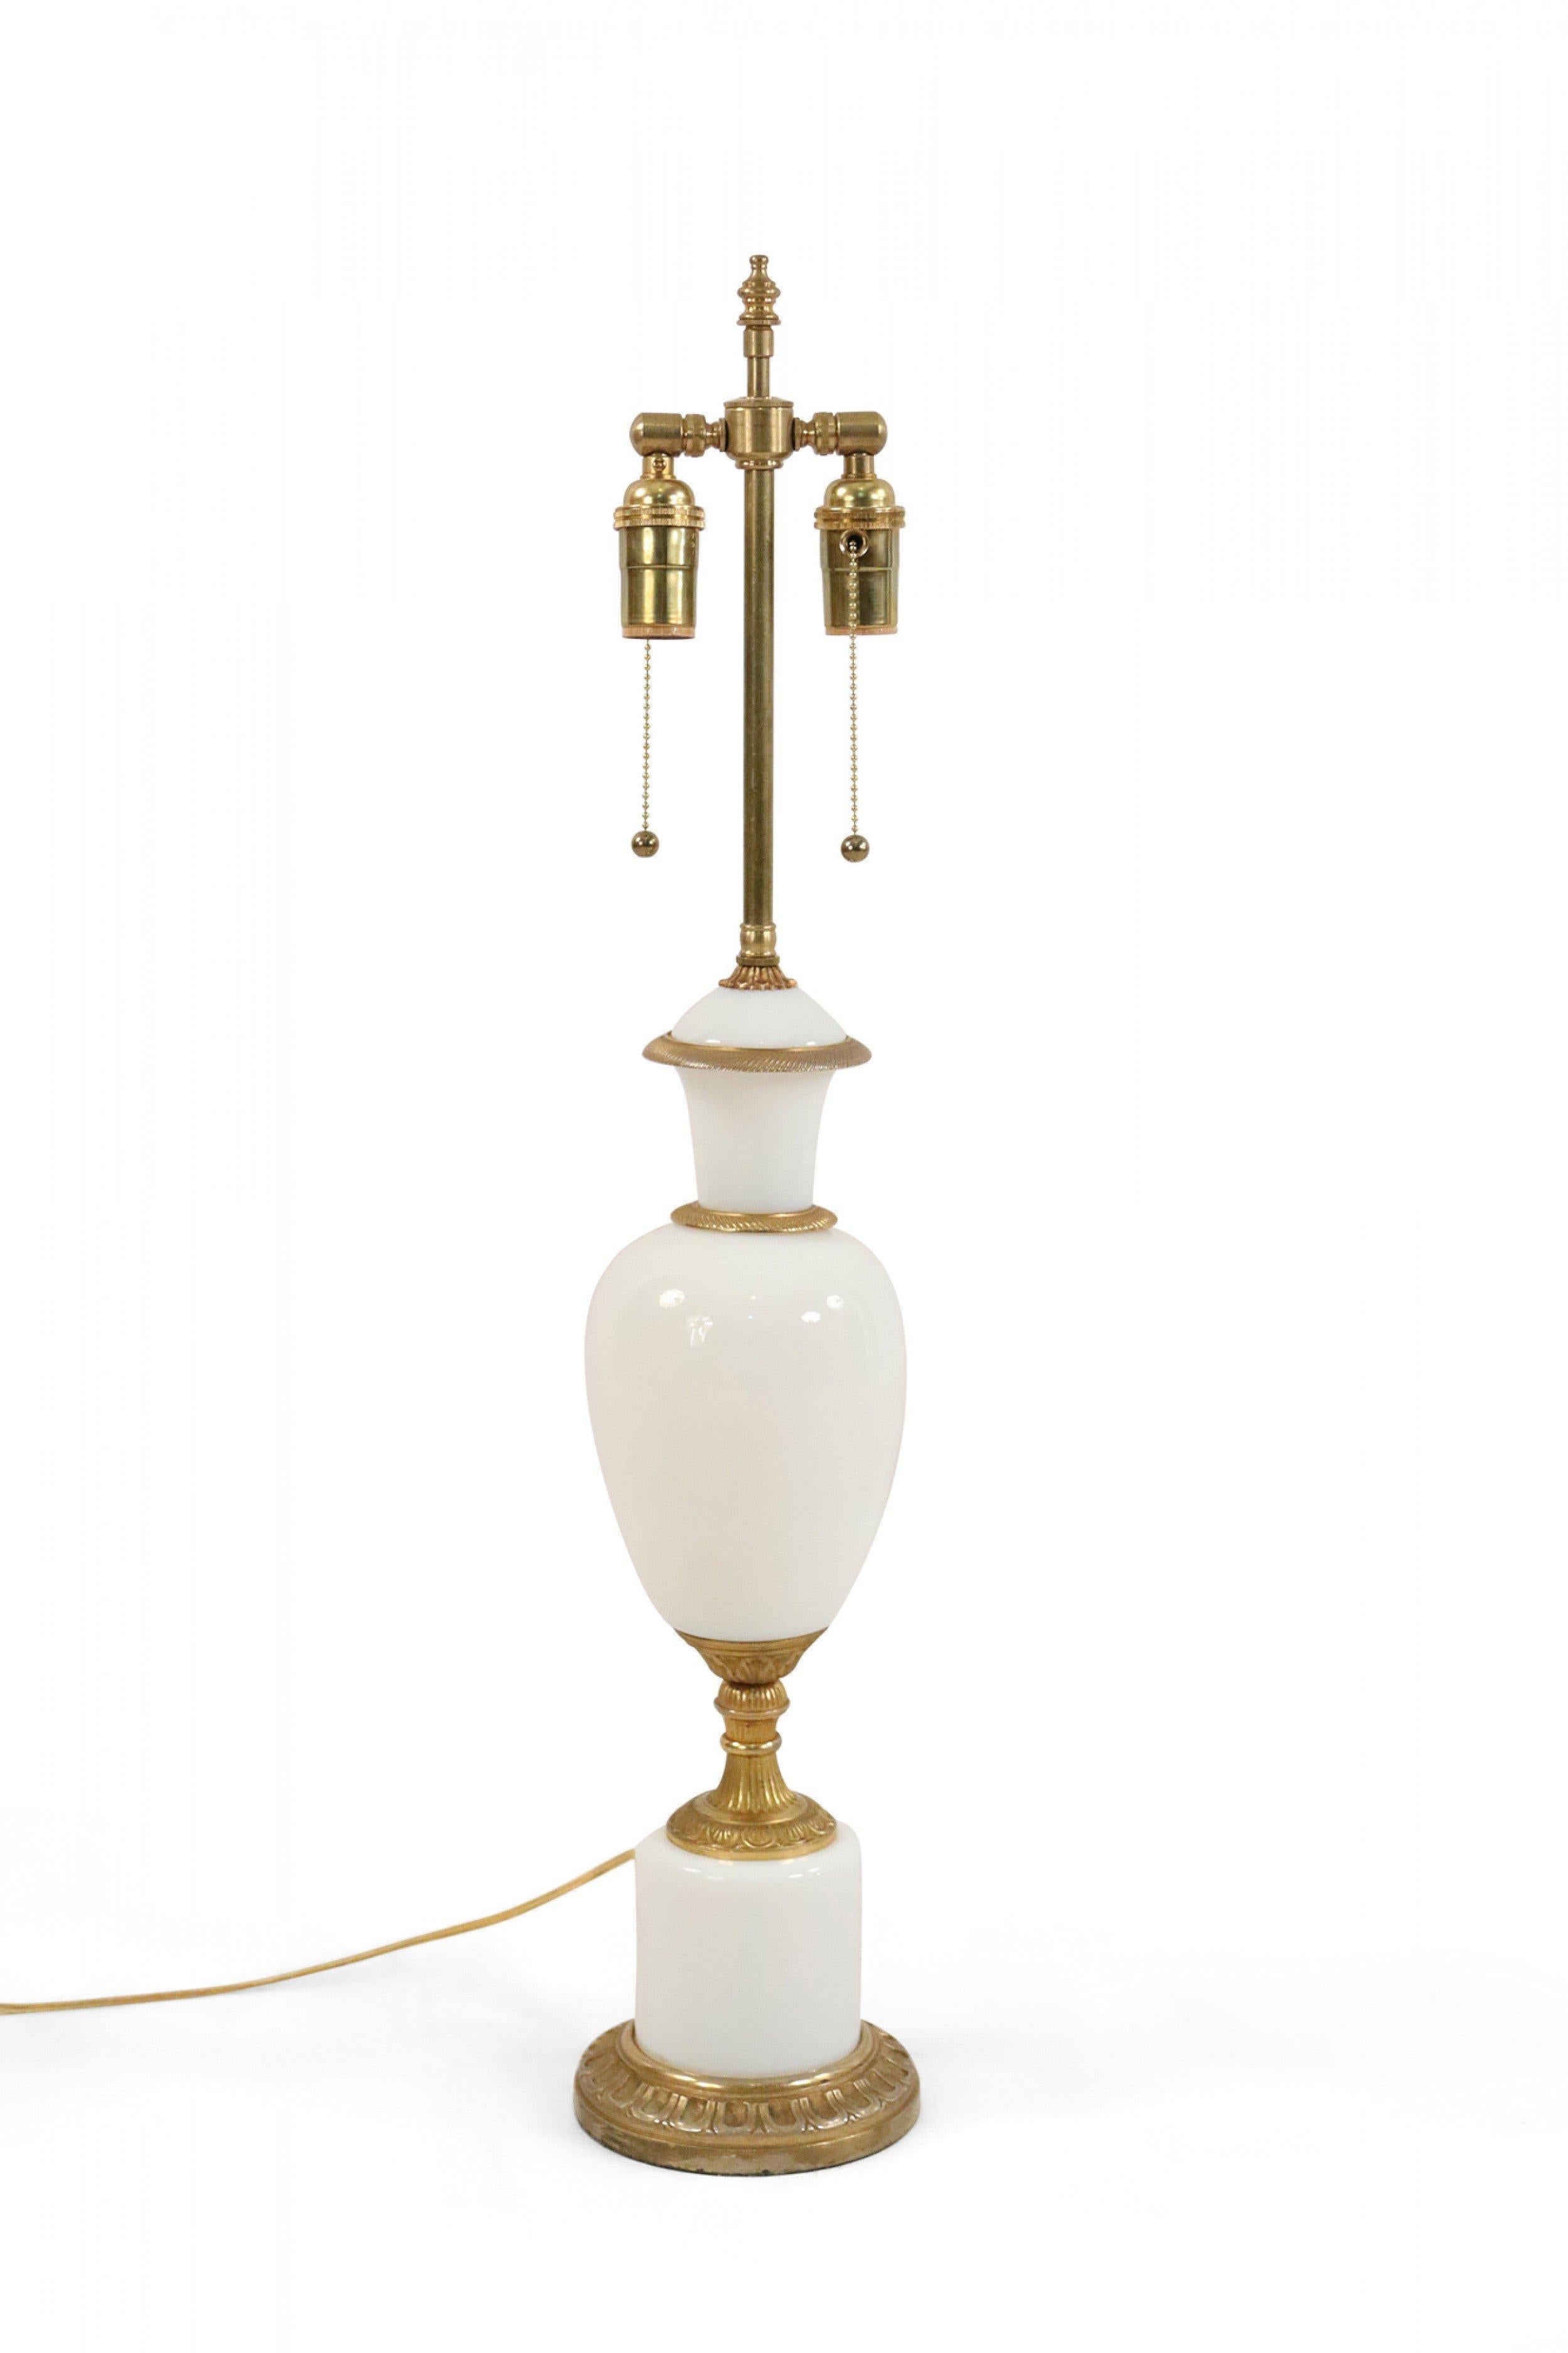 Pair of French Victorian-style white opaline glass table lamps with vase-shaped forms and brass details on a circular base.